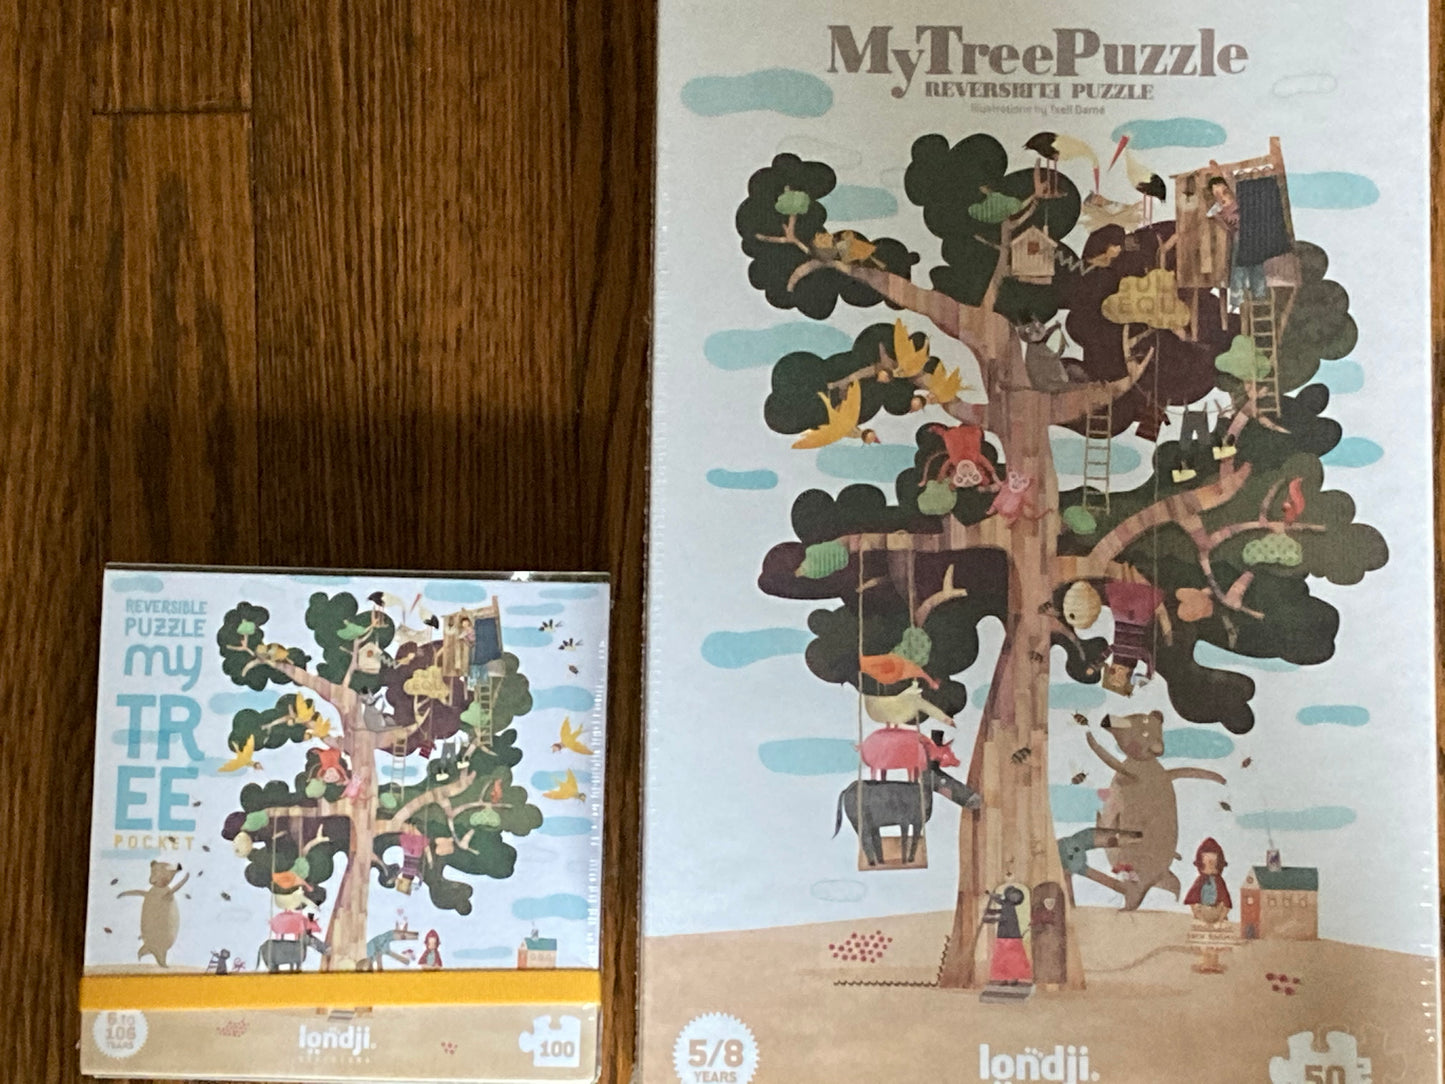 Puzzle - MY TREE ( small) - Reversible.